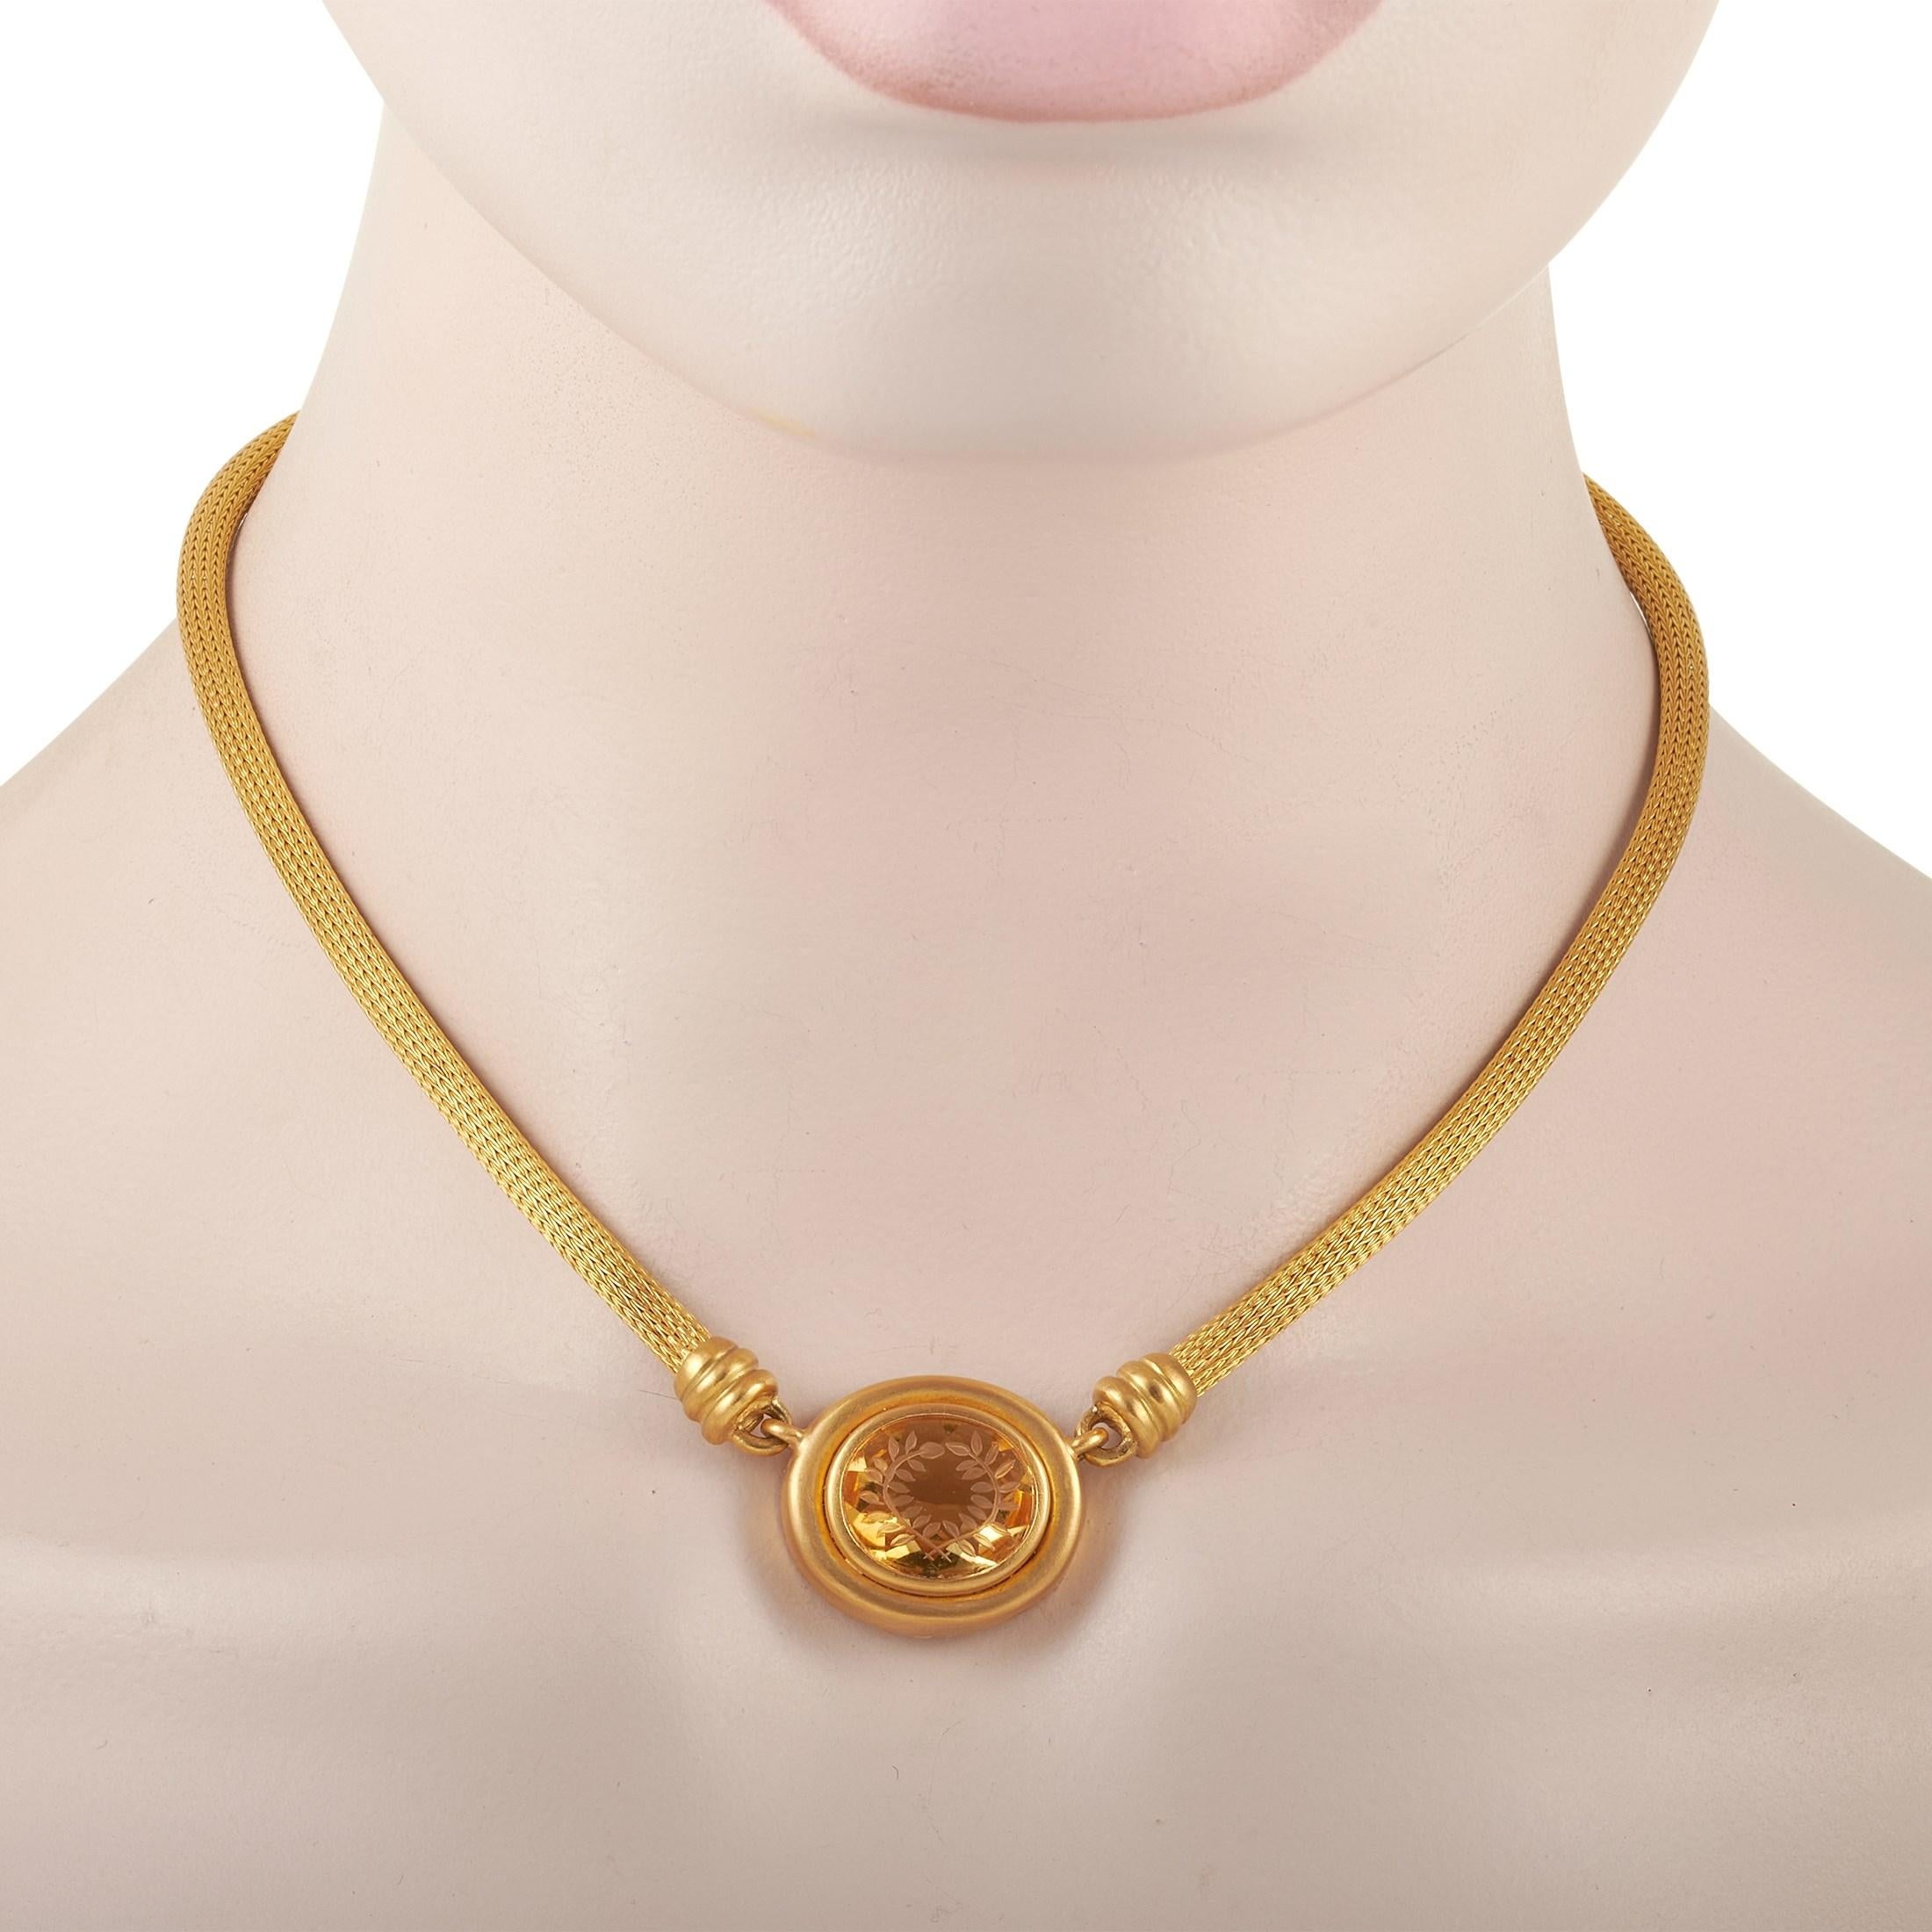 You can count on the bejeweled beauty of this piece to give your looks some character. The Zolotas Intaglio 18K Yellow Gold Citrine Vintage Necklace features a honey-colored citrine gemstone bezel-set on a round pendant. Inspired by mythical Ancient